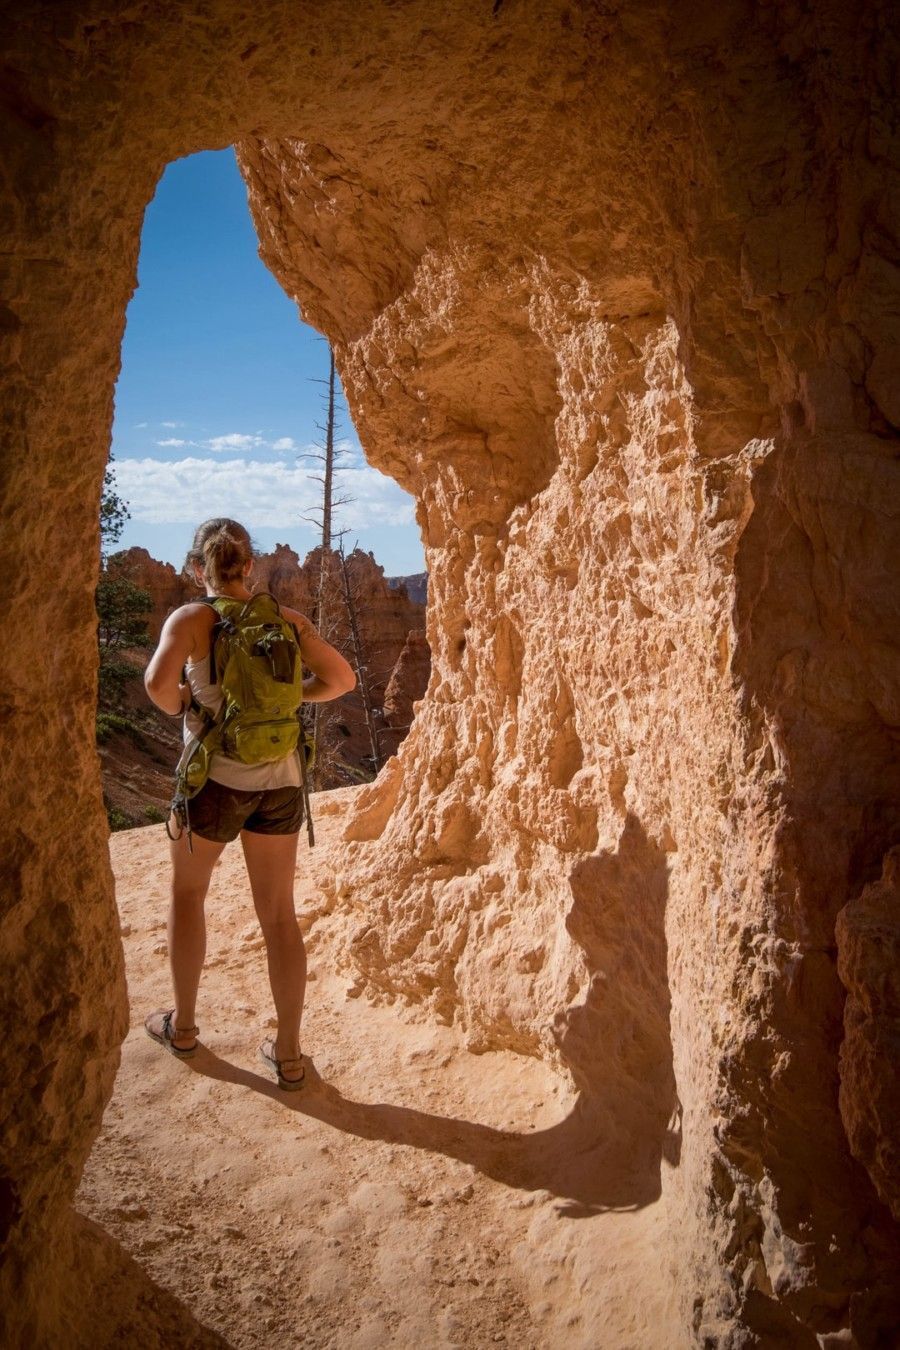 woman-carrying-backpack-standing-in-cave-passage